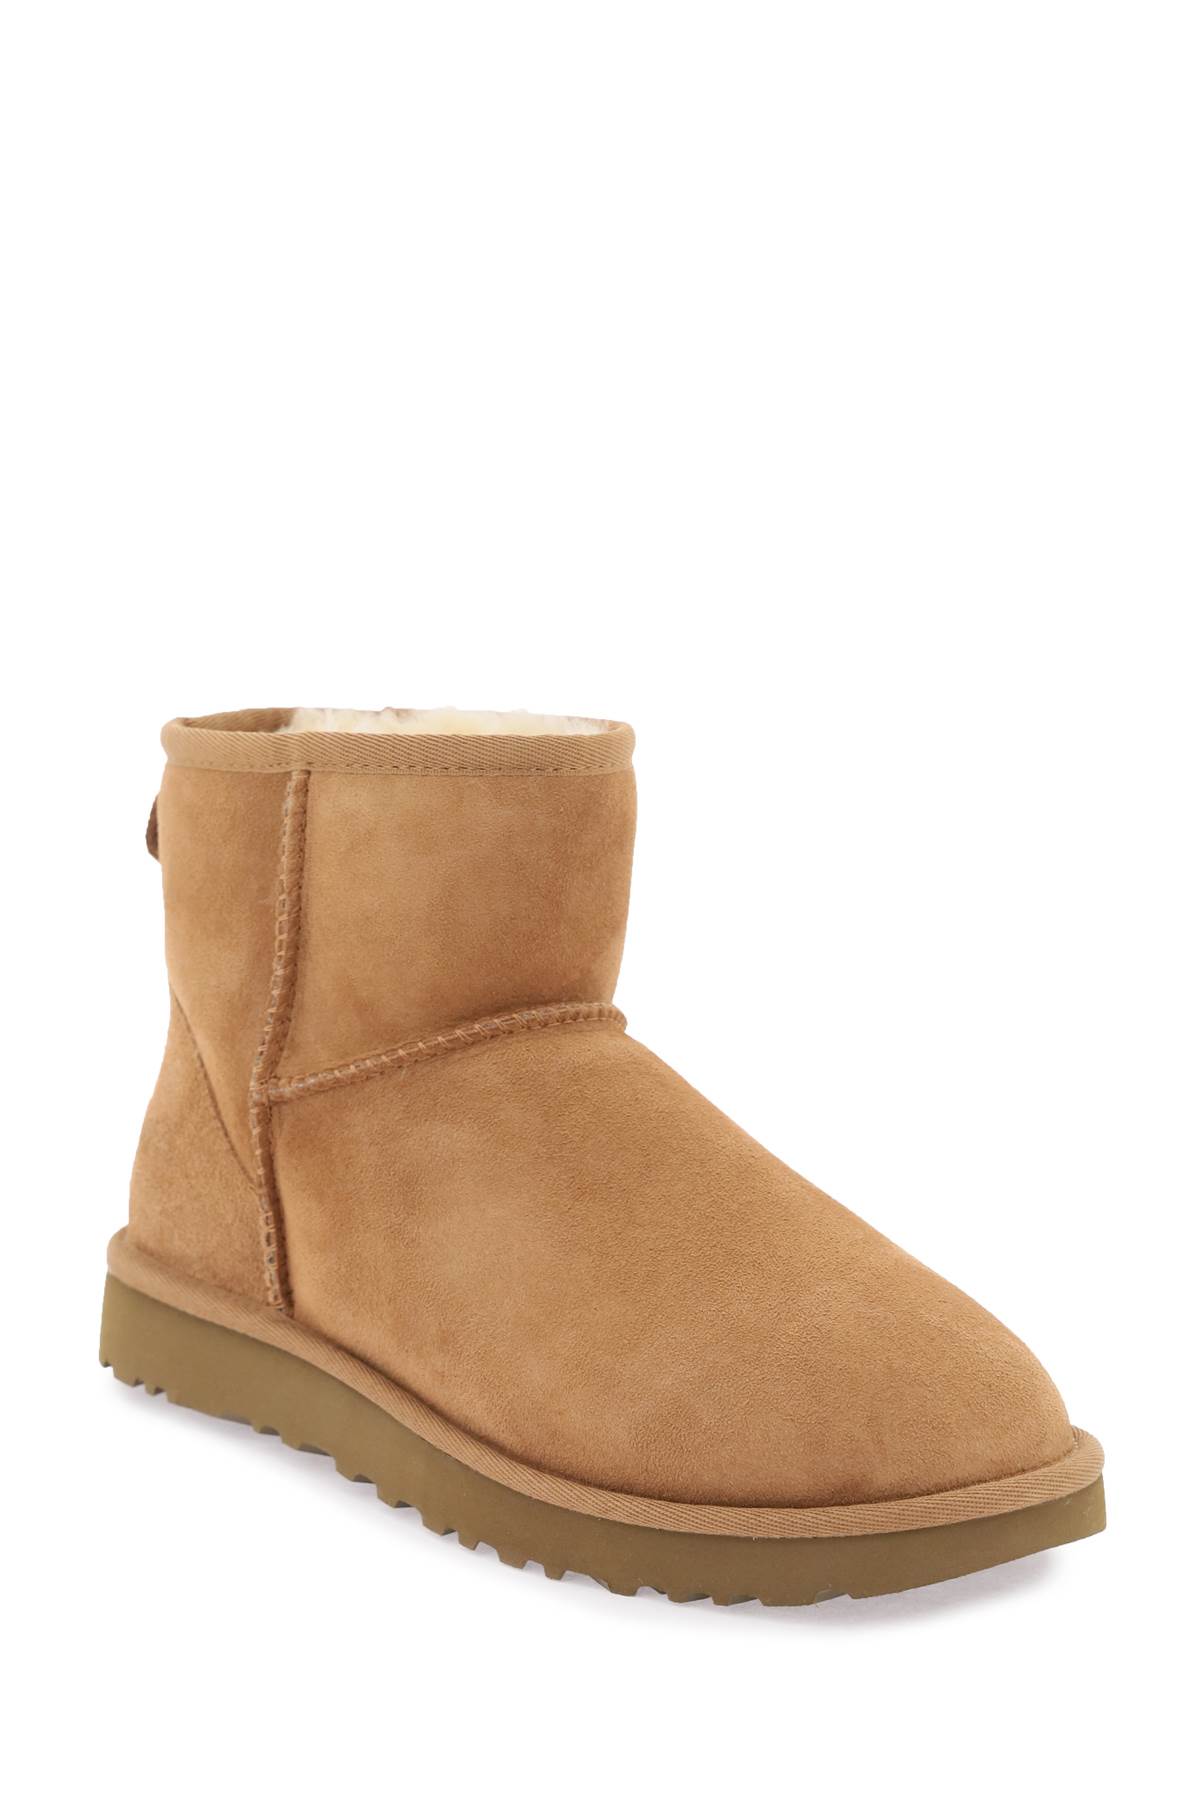 Shop Ugg Classic Mini Ii Ankle Boots In Che Chestnut